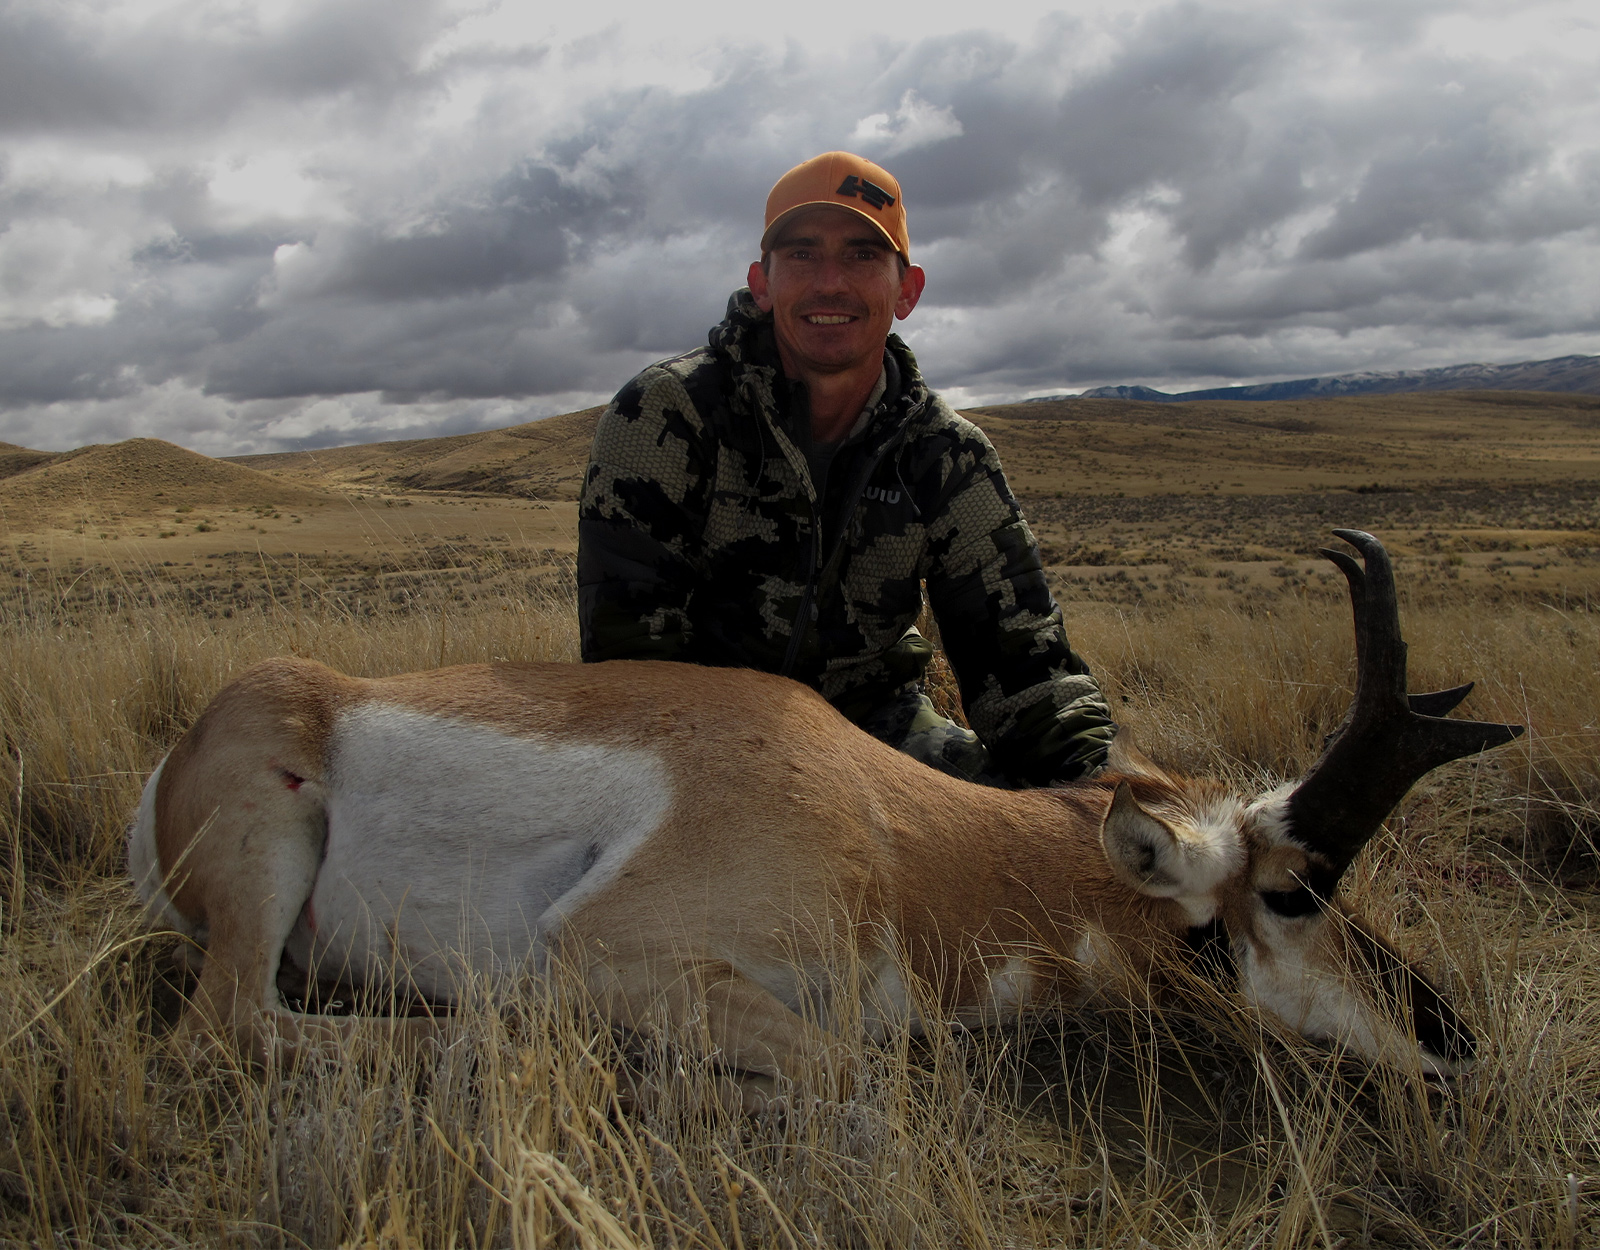 A hunter poses with the pronghorn he harvested. Rolling grasslands are in the background.